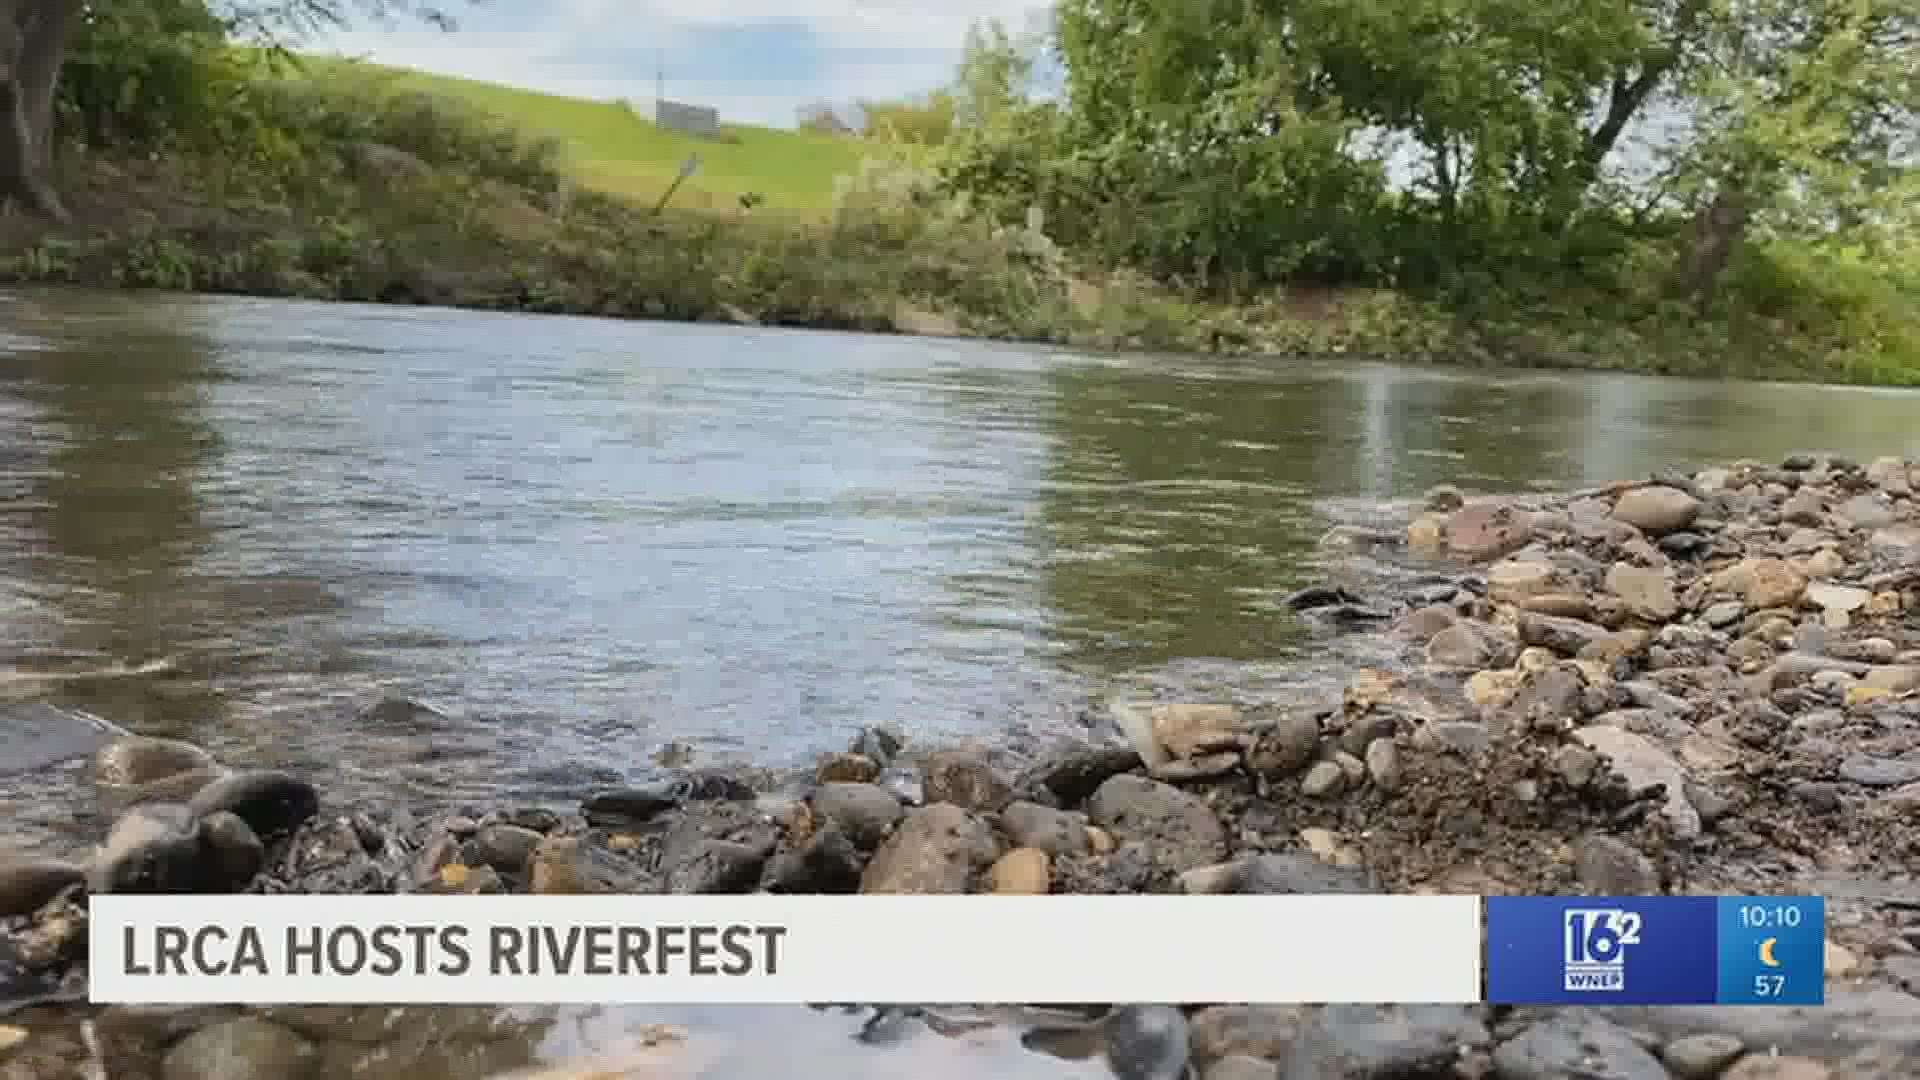 Typically RiverFest is held in May but the first weekend of Autumn was a solid alternative.